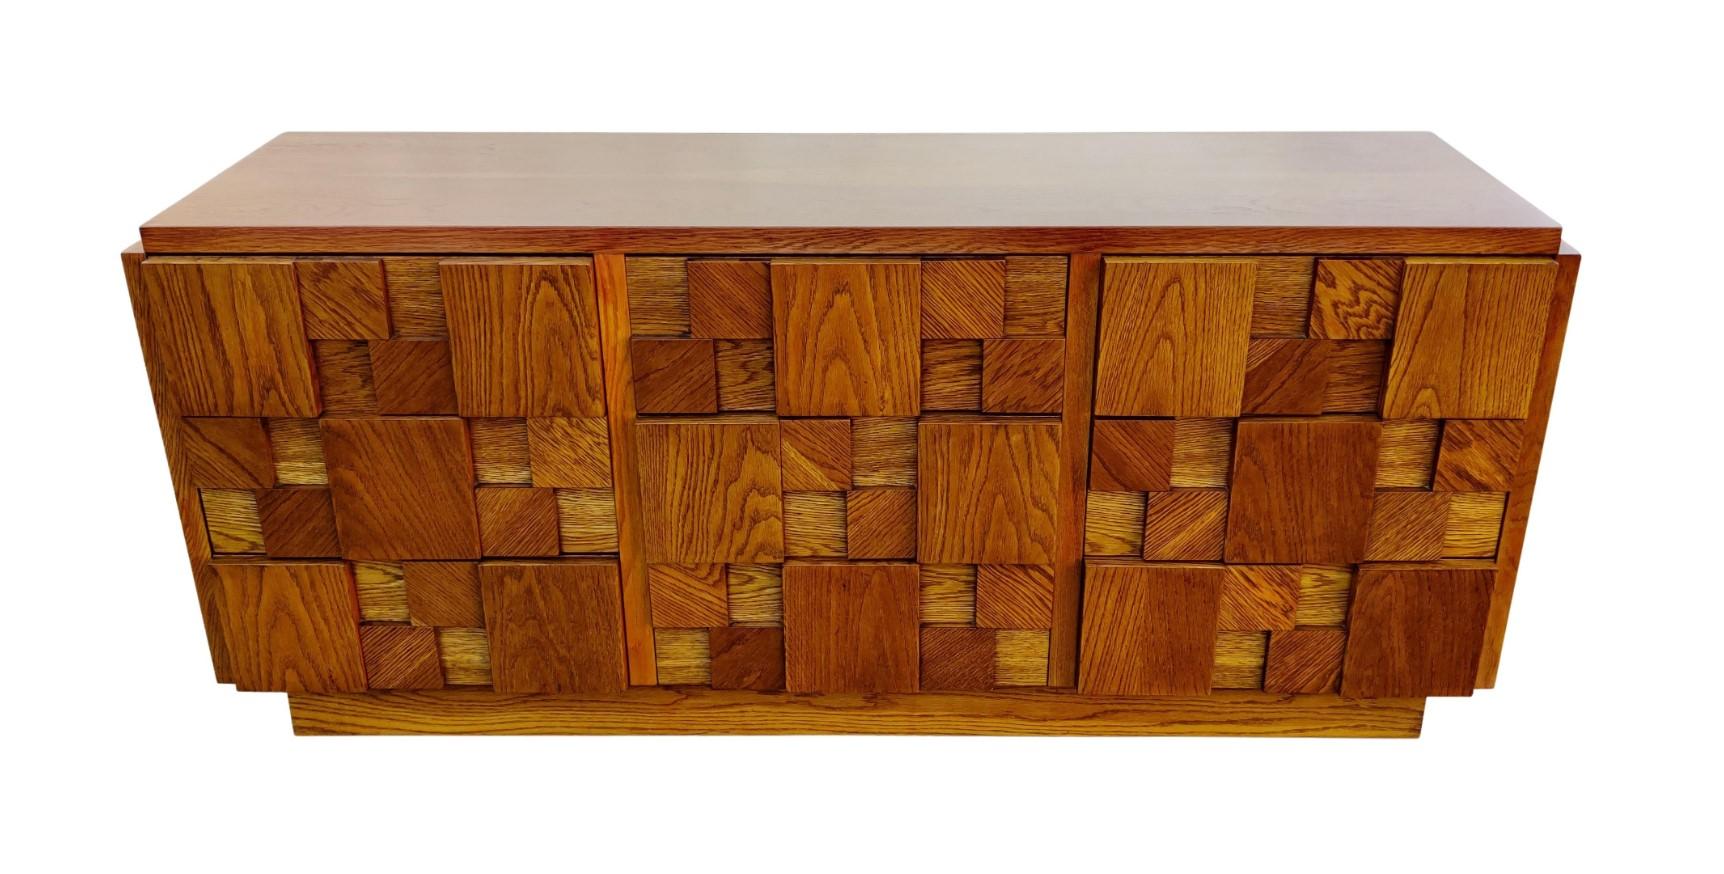 This dresser was designed in the brutalist style made iconic by Paul Evans. Made with tens of blocks of walnut attached to the front, it lends an imposing and dark look while retaining the rich color of the walnut. The dresser sports 9 expansive